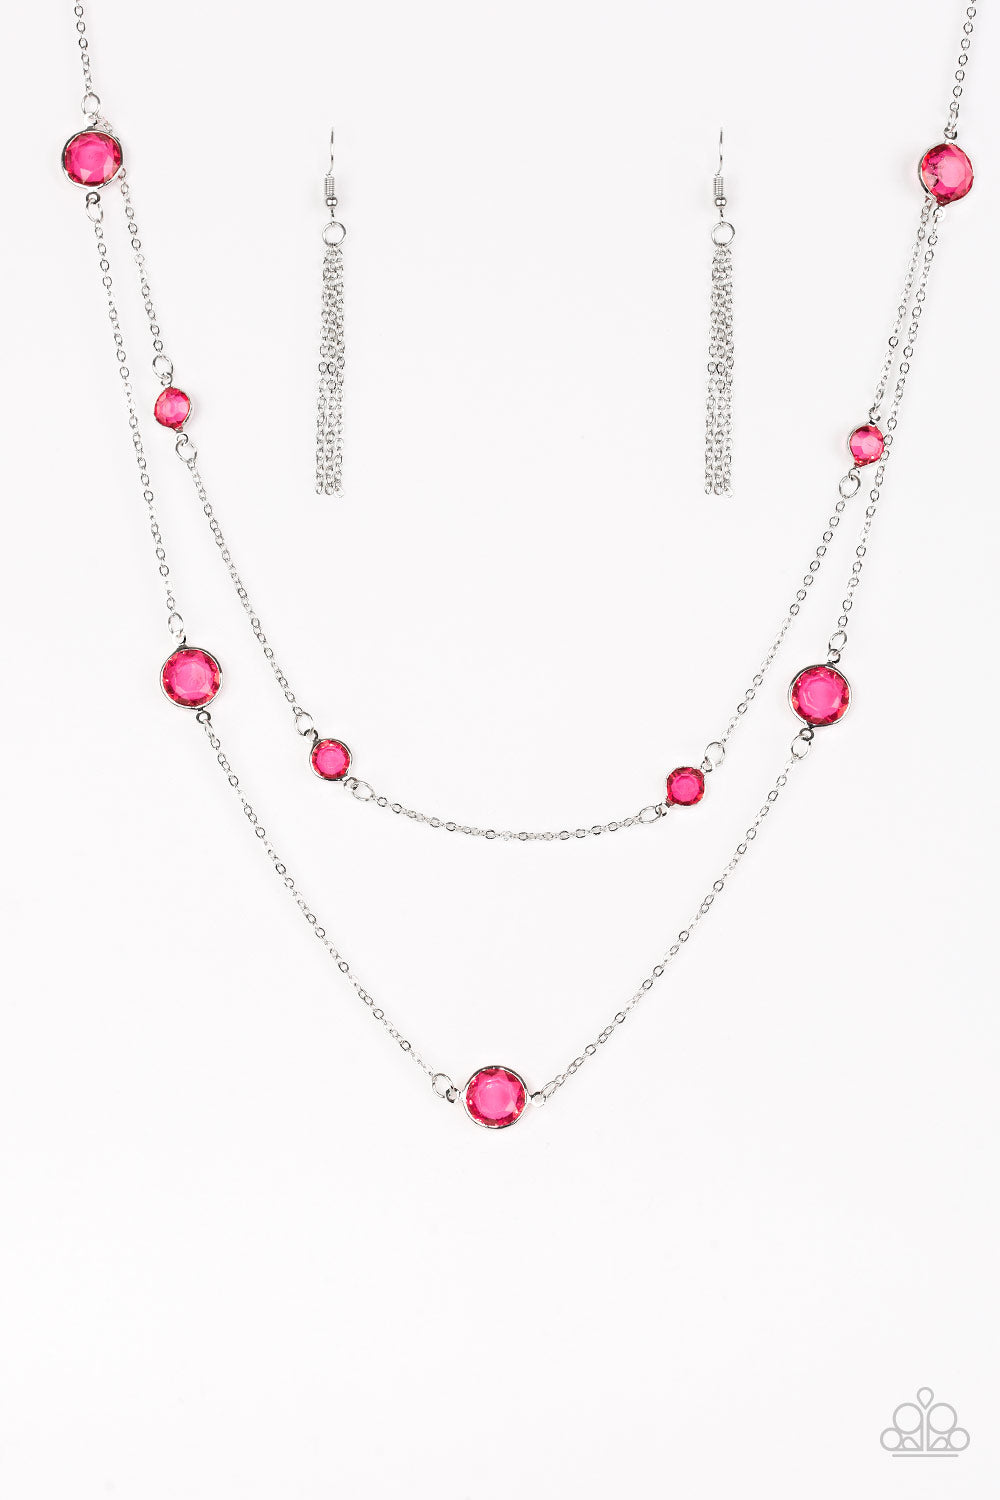 RAISE YOUR GLASS - PINK NECKLACE